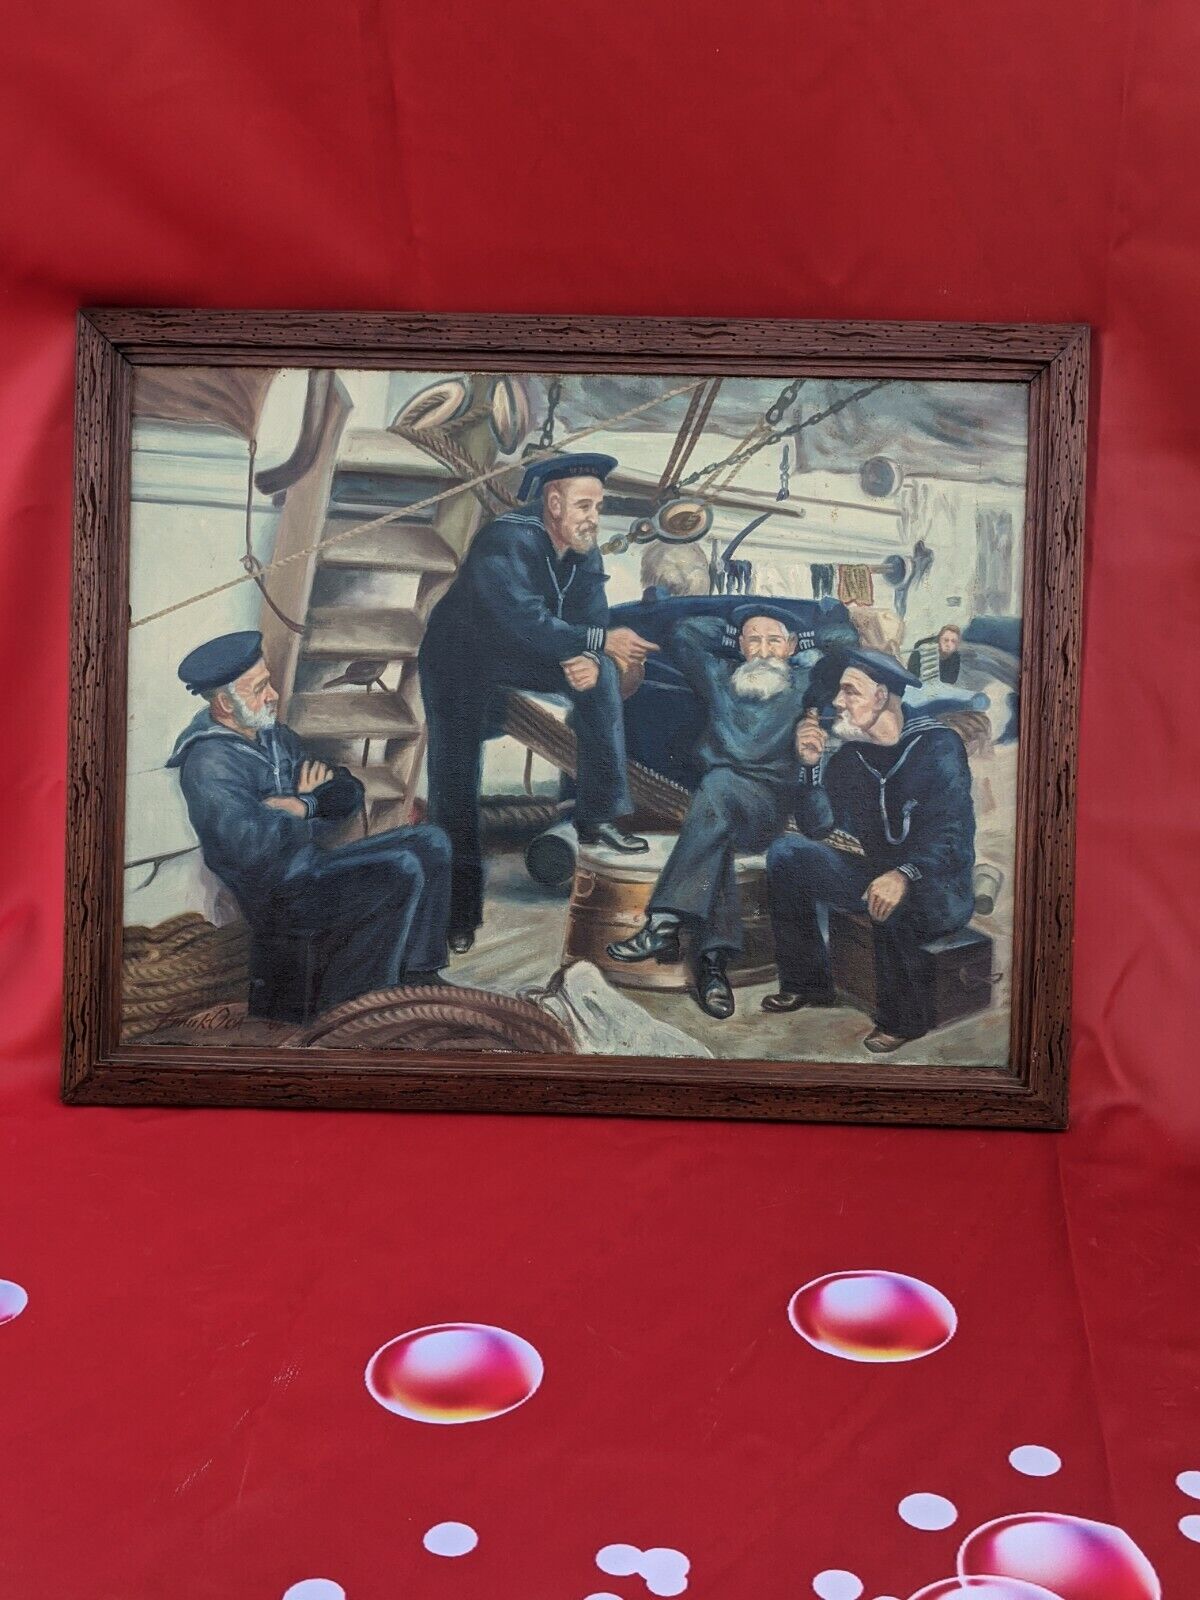 KN-10866 THE OLD NAVY (SPINNING A YARN ABOARD USS MOHICAN, 1888) OIL ON CANVAS, 